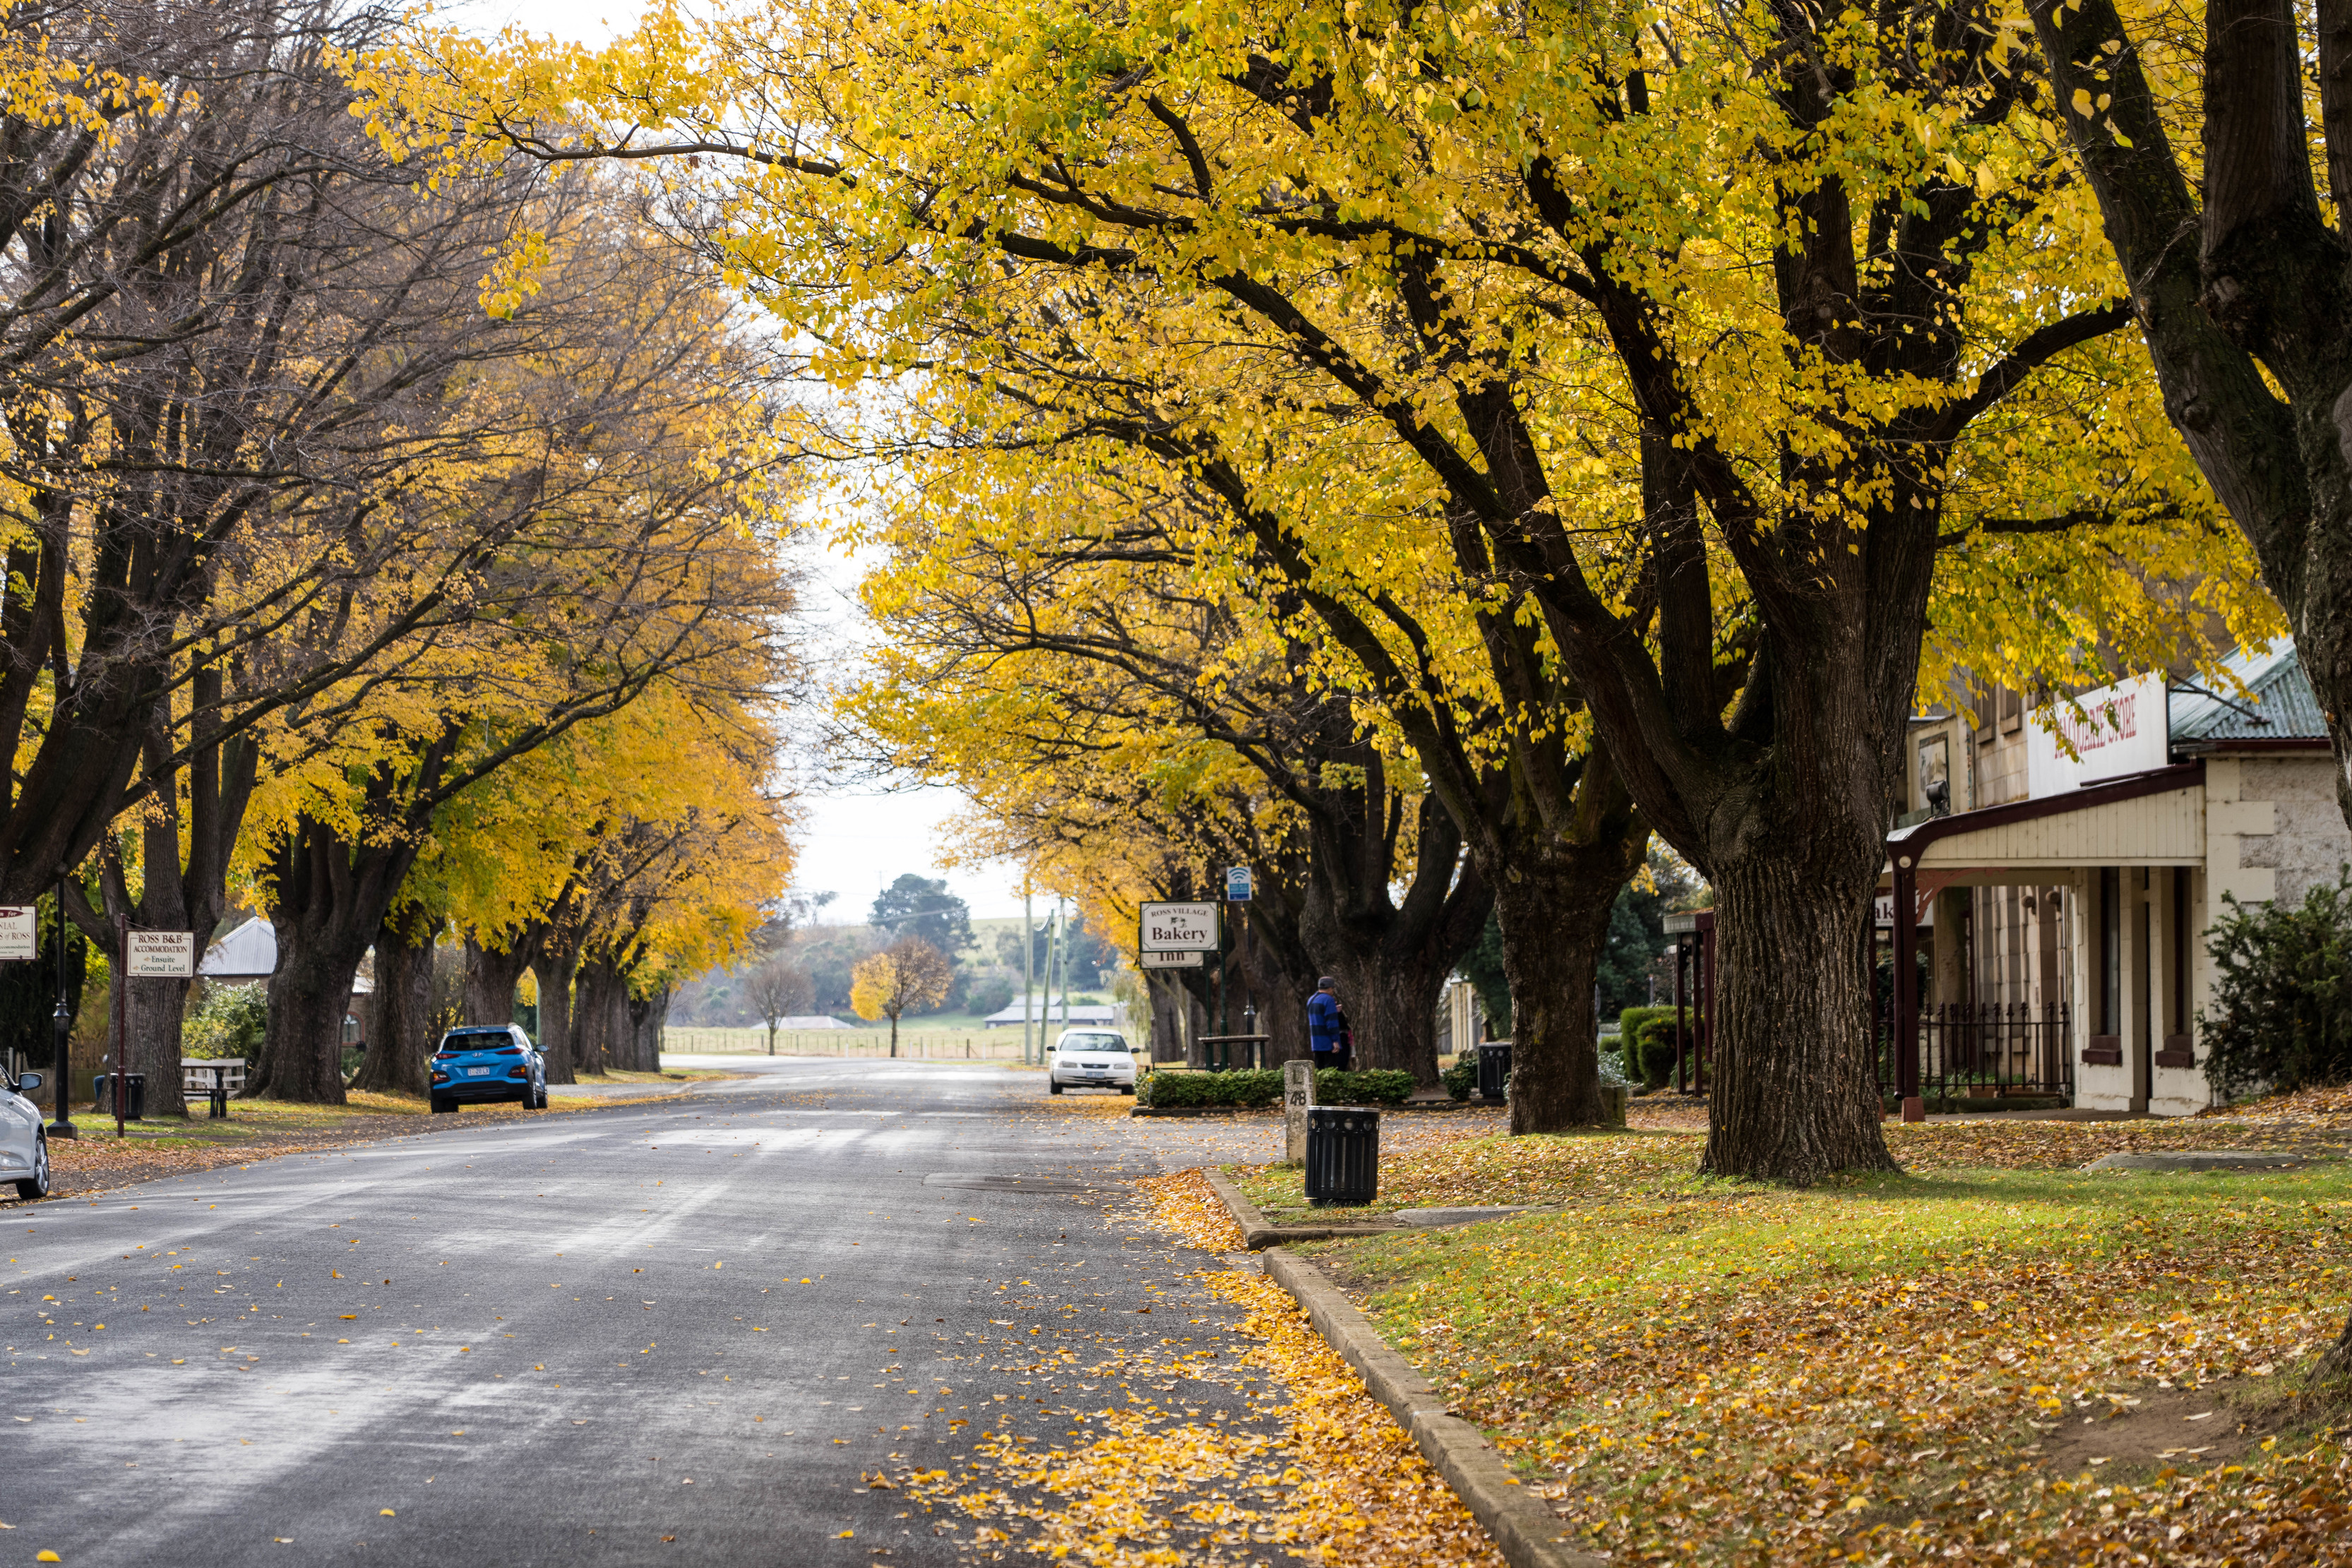 Beautiful autumn colours fill Church Street, in Ross. Large yellow trees line down the street.